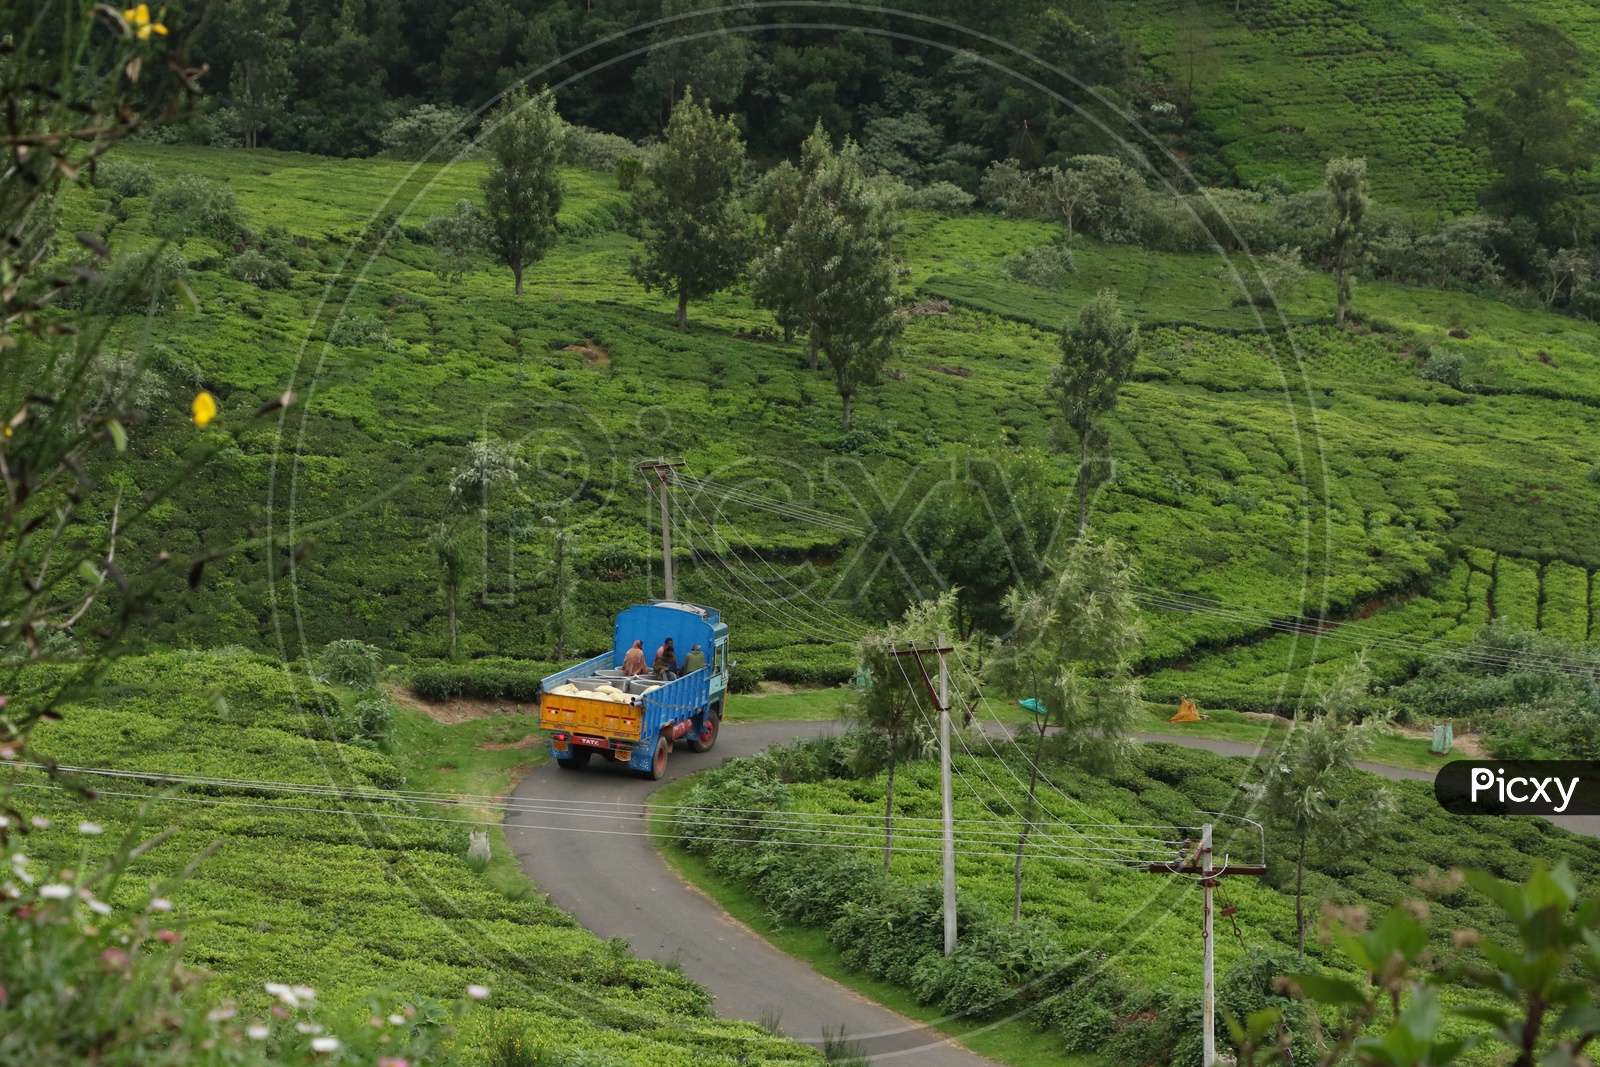 A Heavy Vehicle In The Roads of Ooty